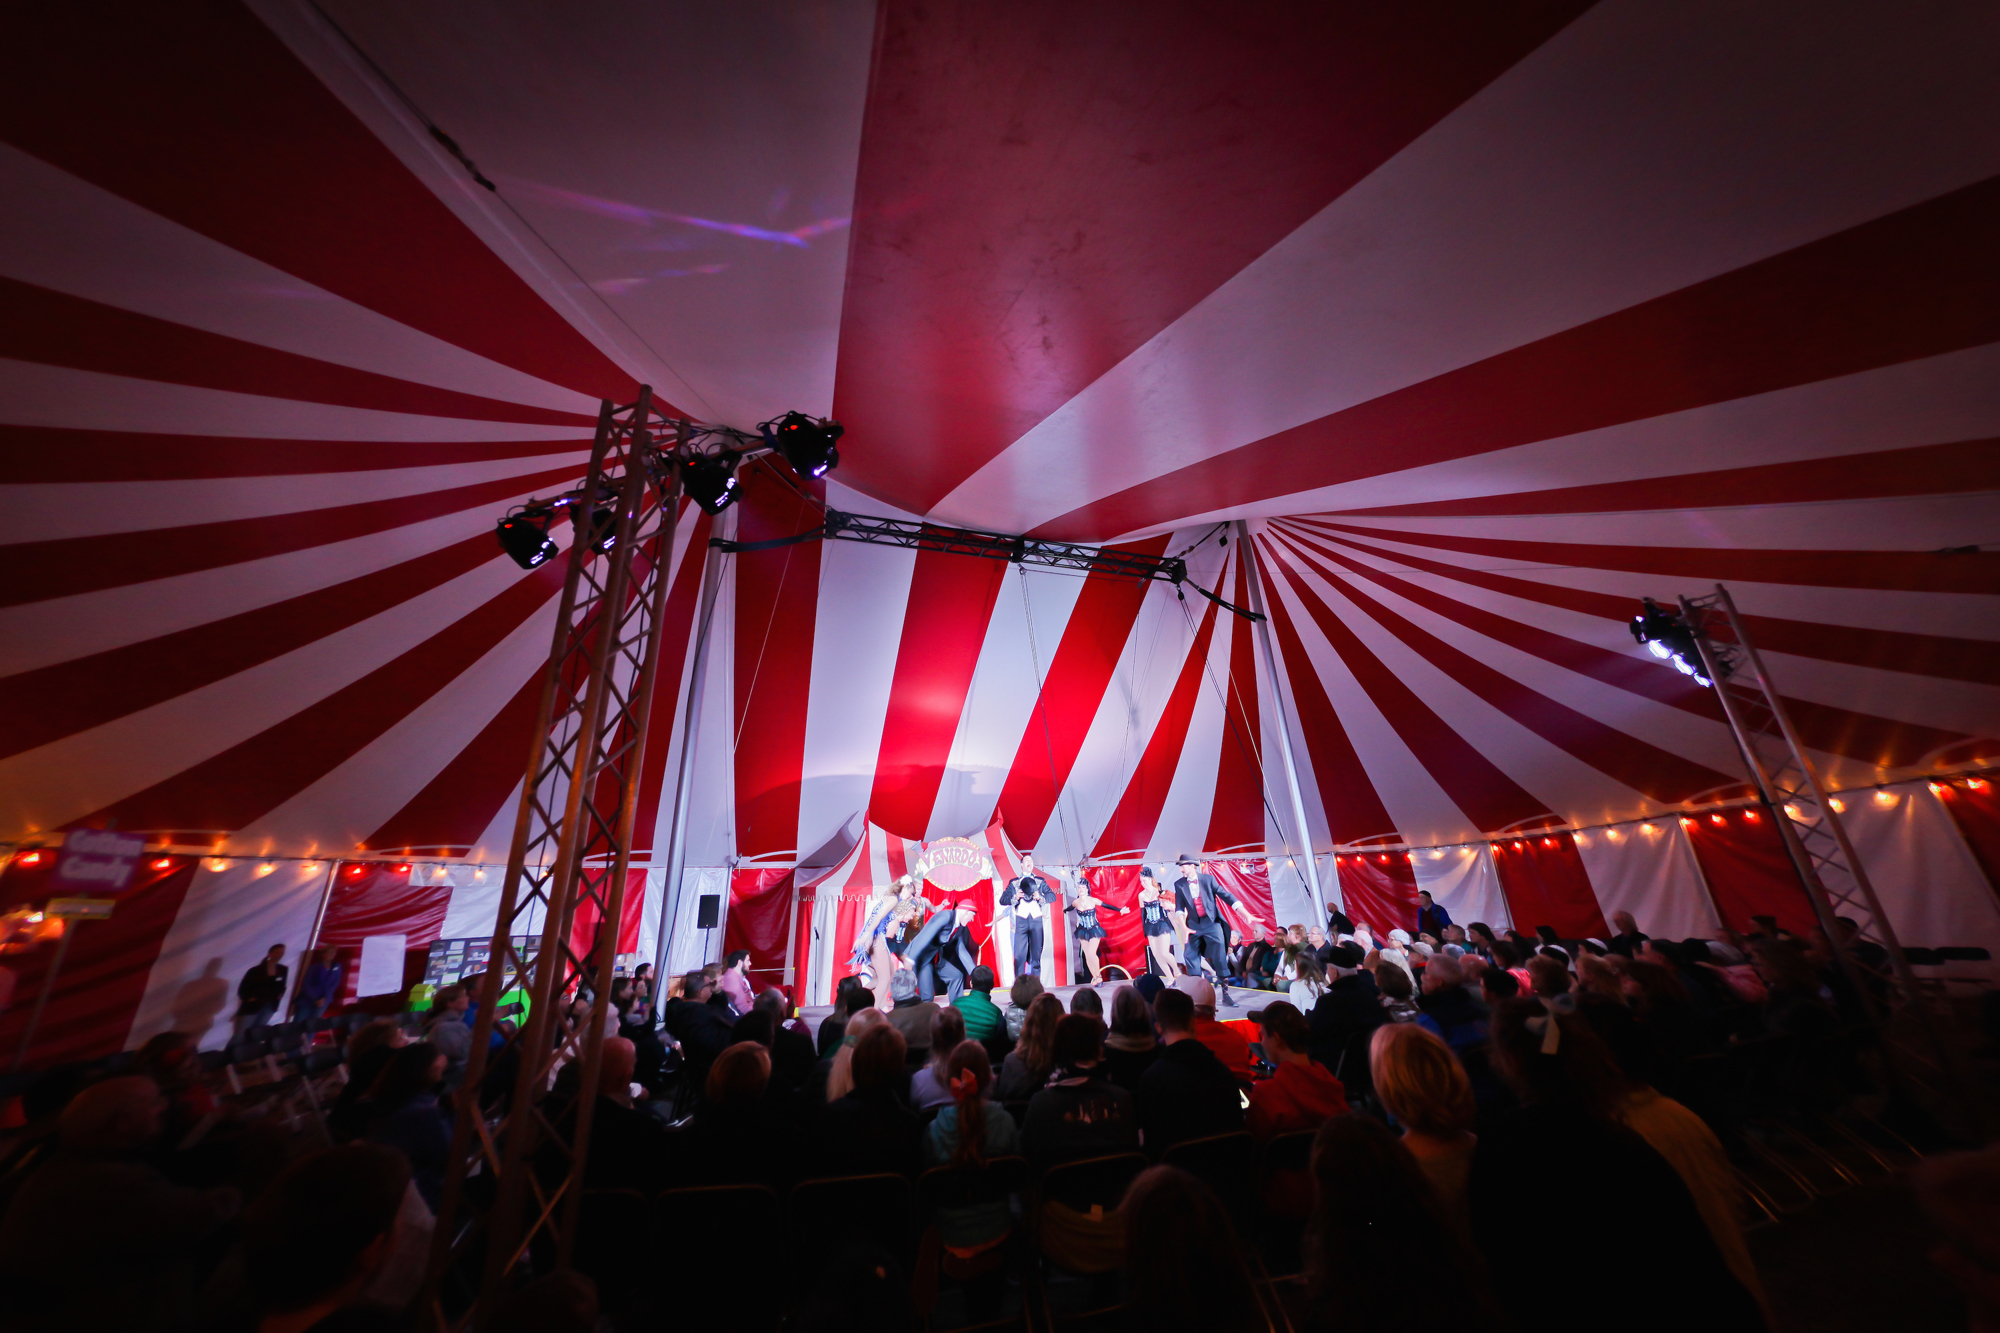 The circus has its own, custom-made tent. Inside is room for 350 people. (Courtesy Venardos Circus and Jeff Nelson Photography)